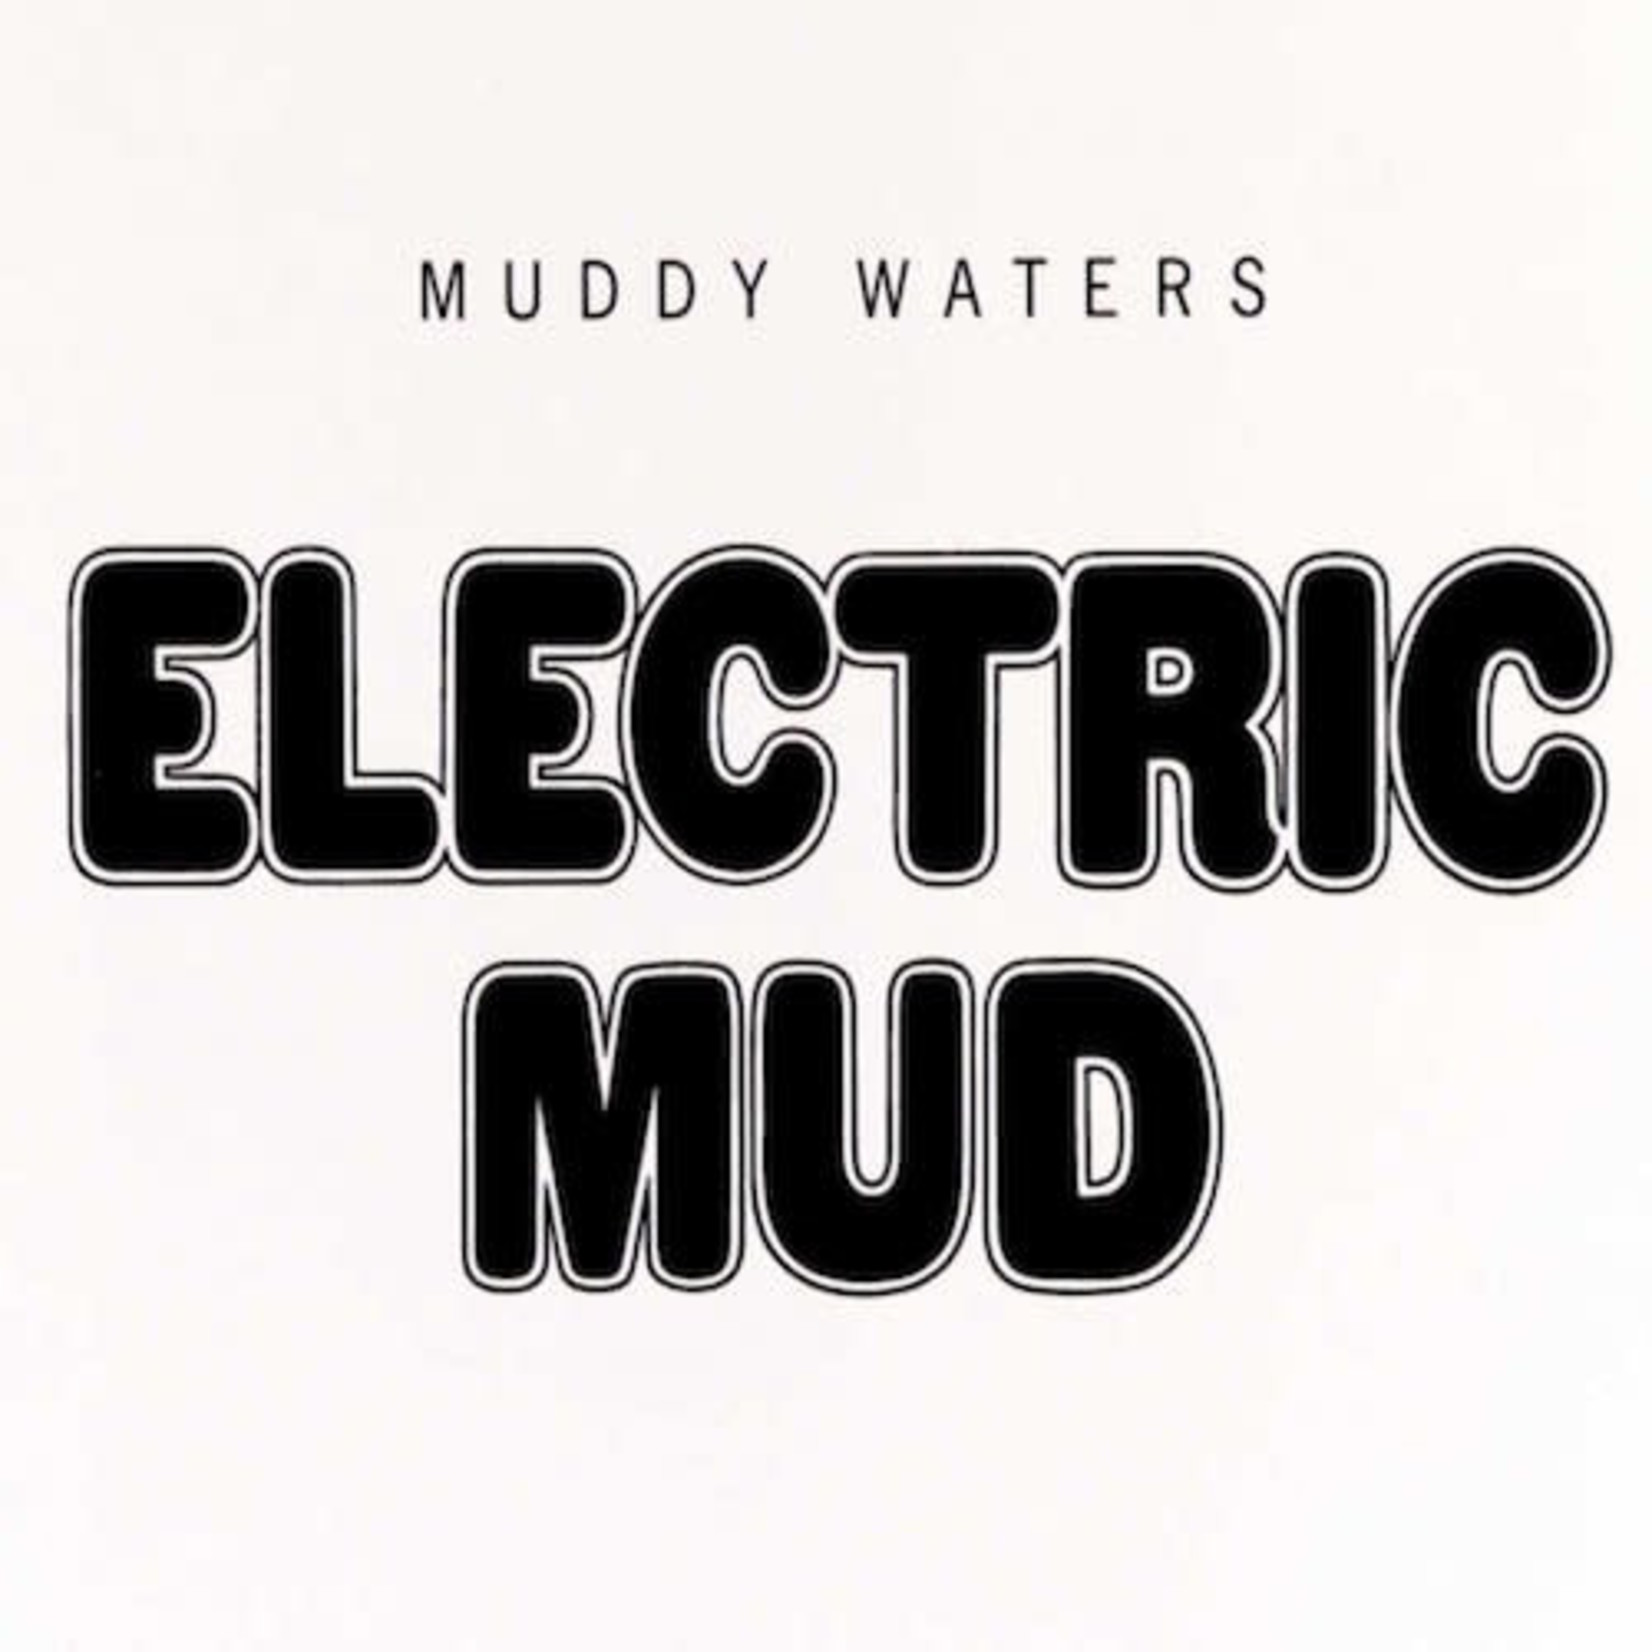 [New] Muddy Waters - Electric Mud